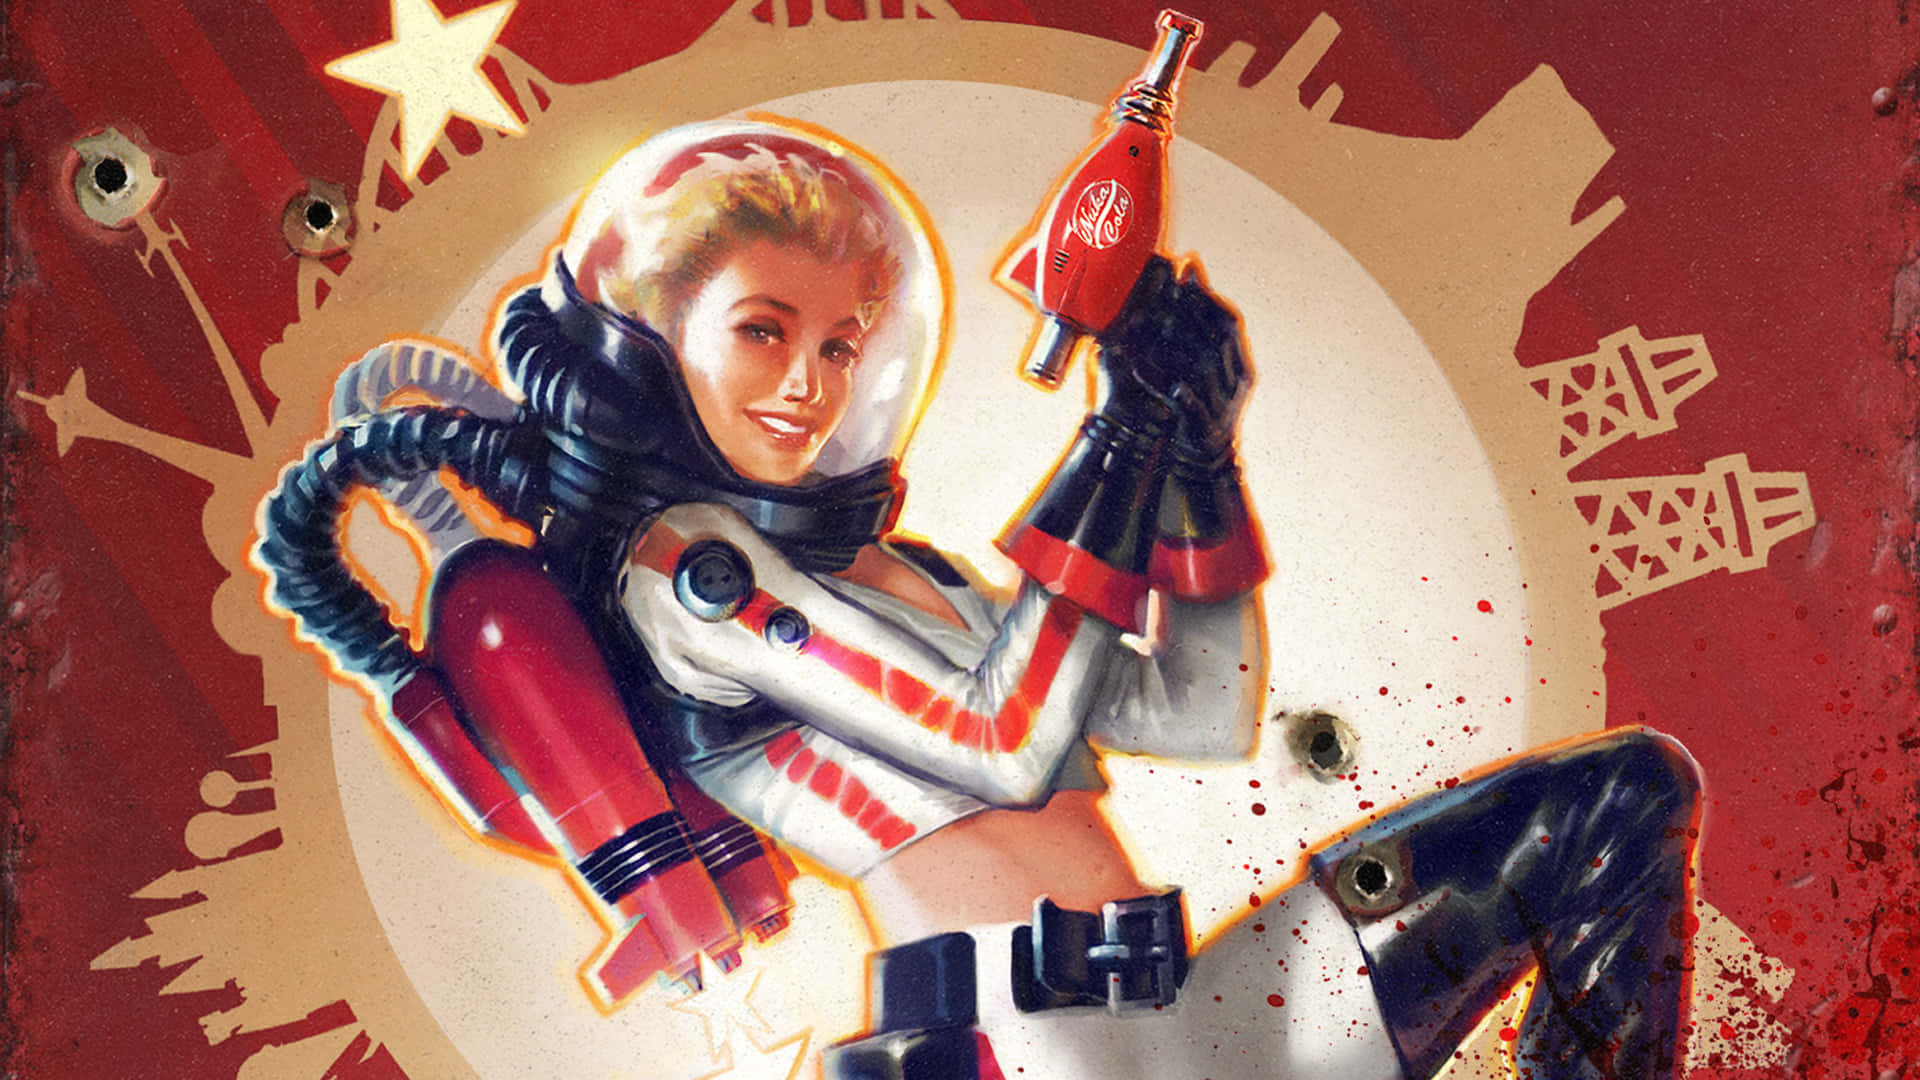 A Woman In Spacesuit Holding A Gun Wallpaper